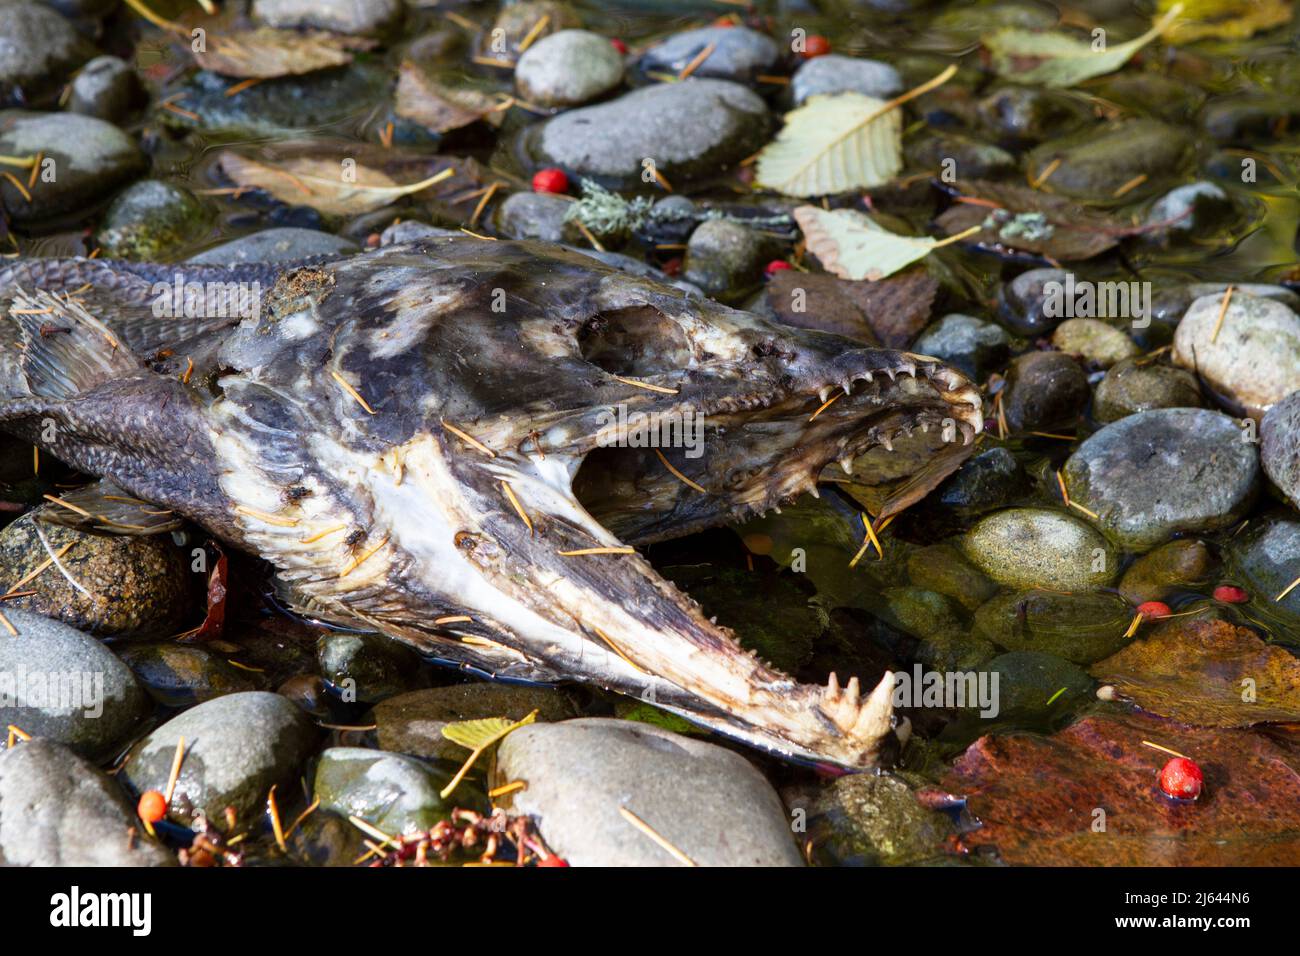 A Salmon carcass decaying in a rocky creek after autumn spawning in Washington State, USA, on Hood Canal. Stock Photo